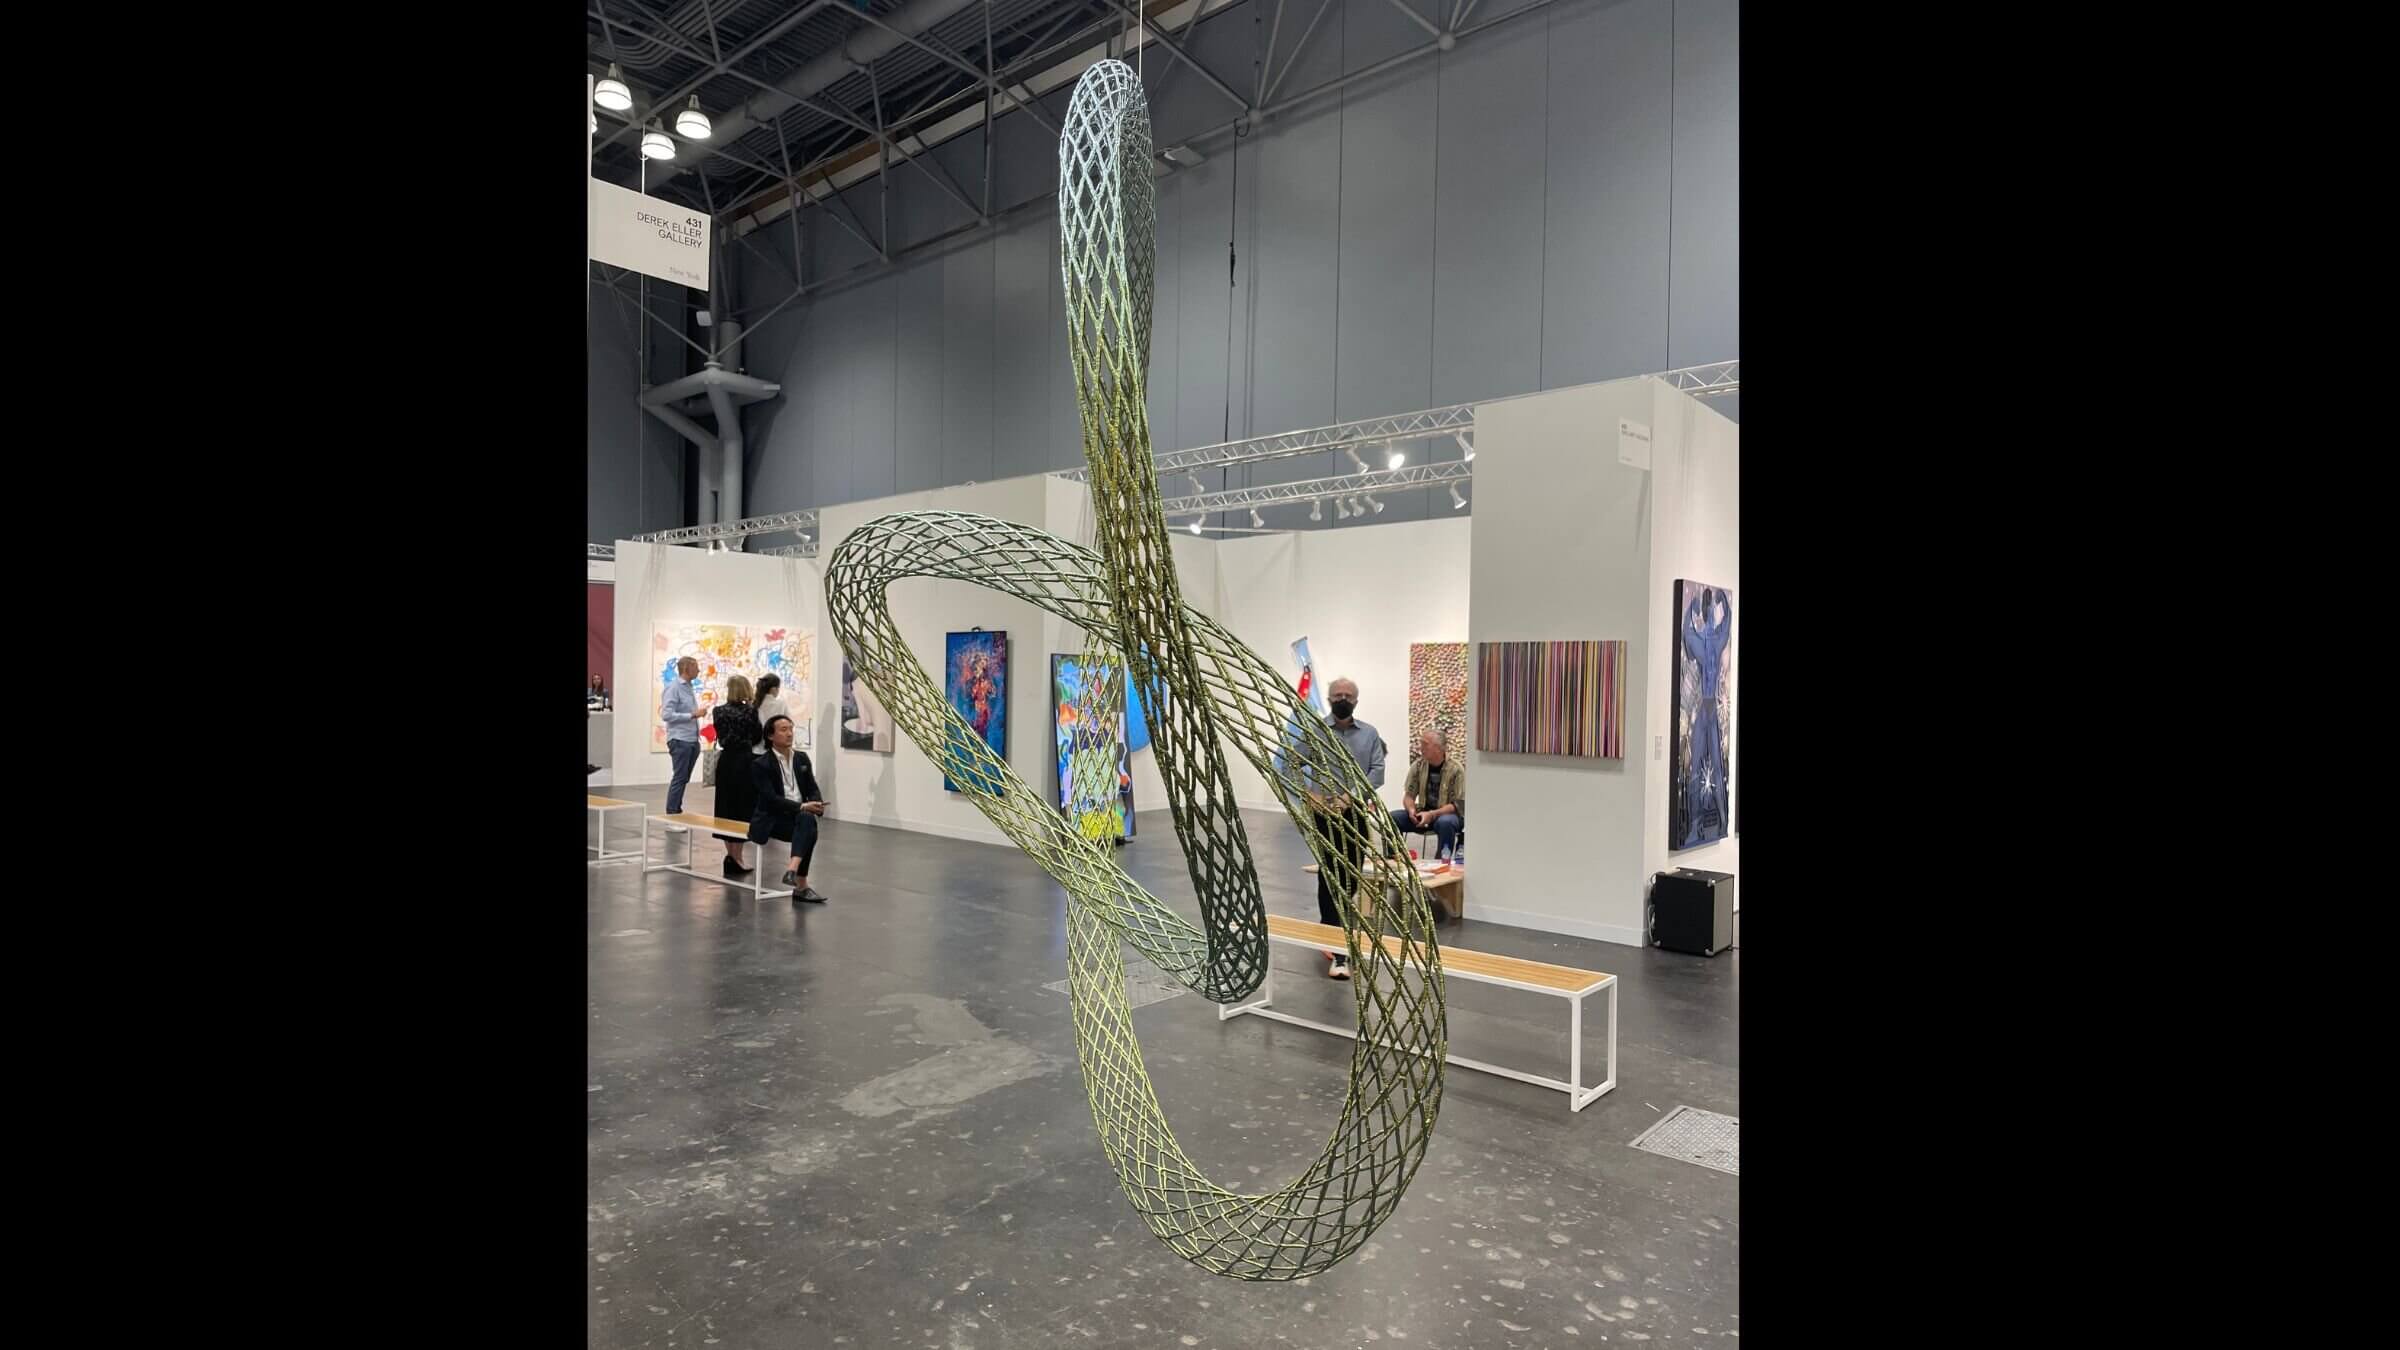 Alyson Shotz's "Rim of the Hour" at The Armory Show, Javits Center, New York City.